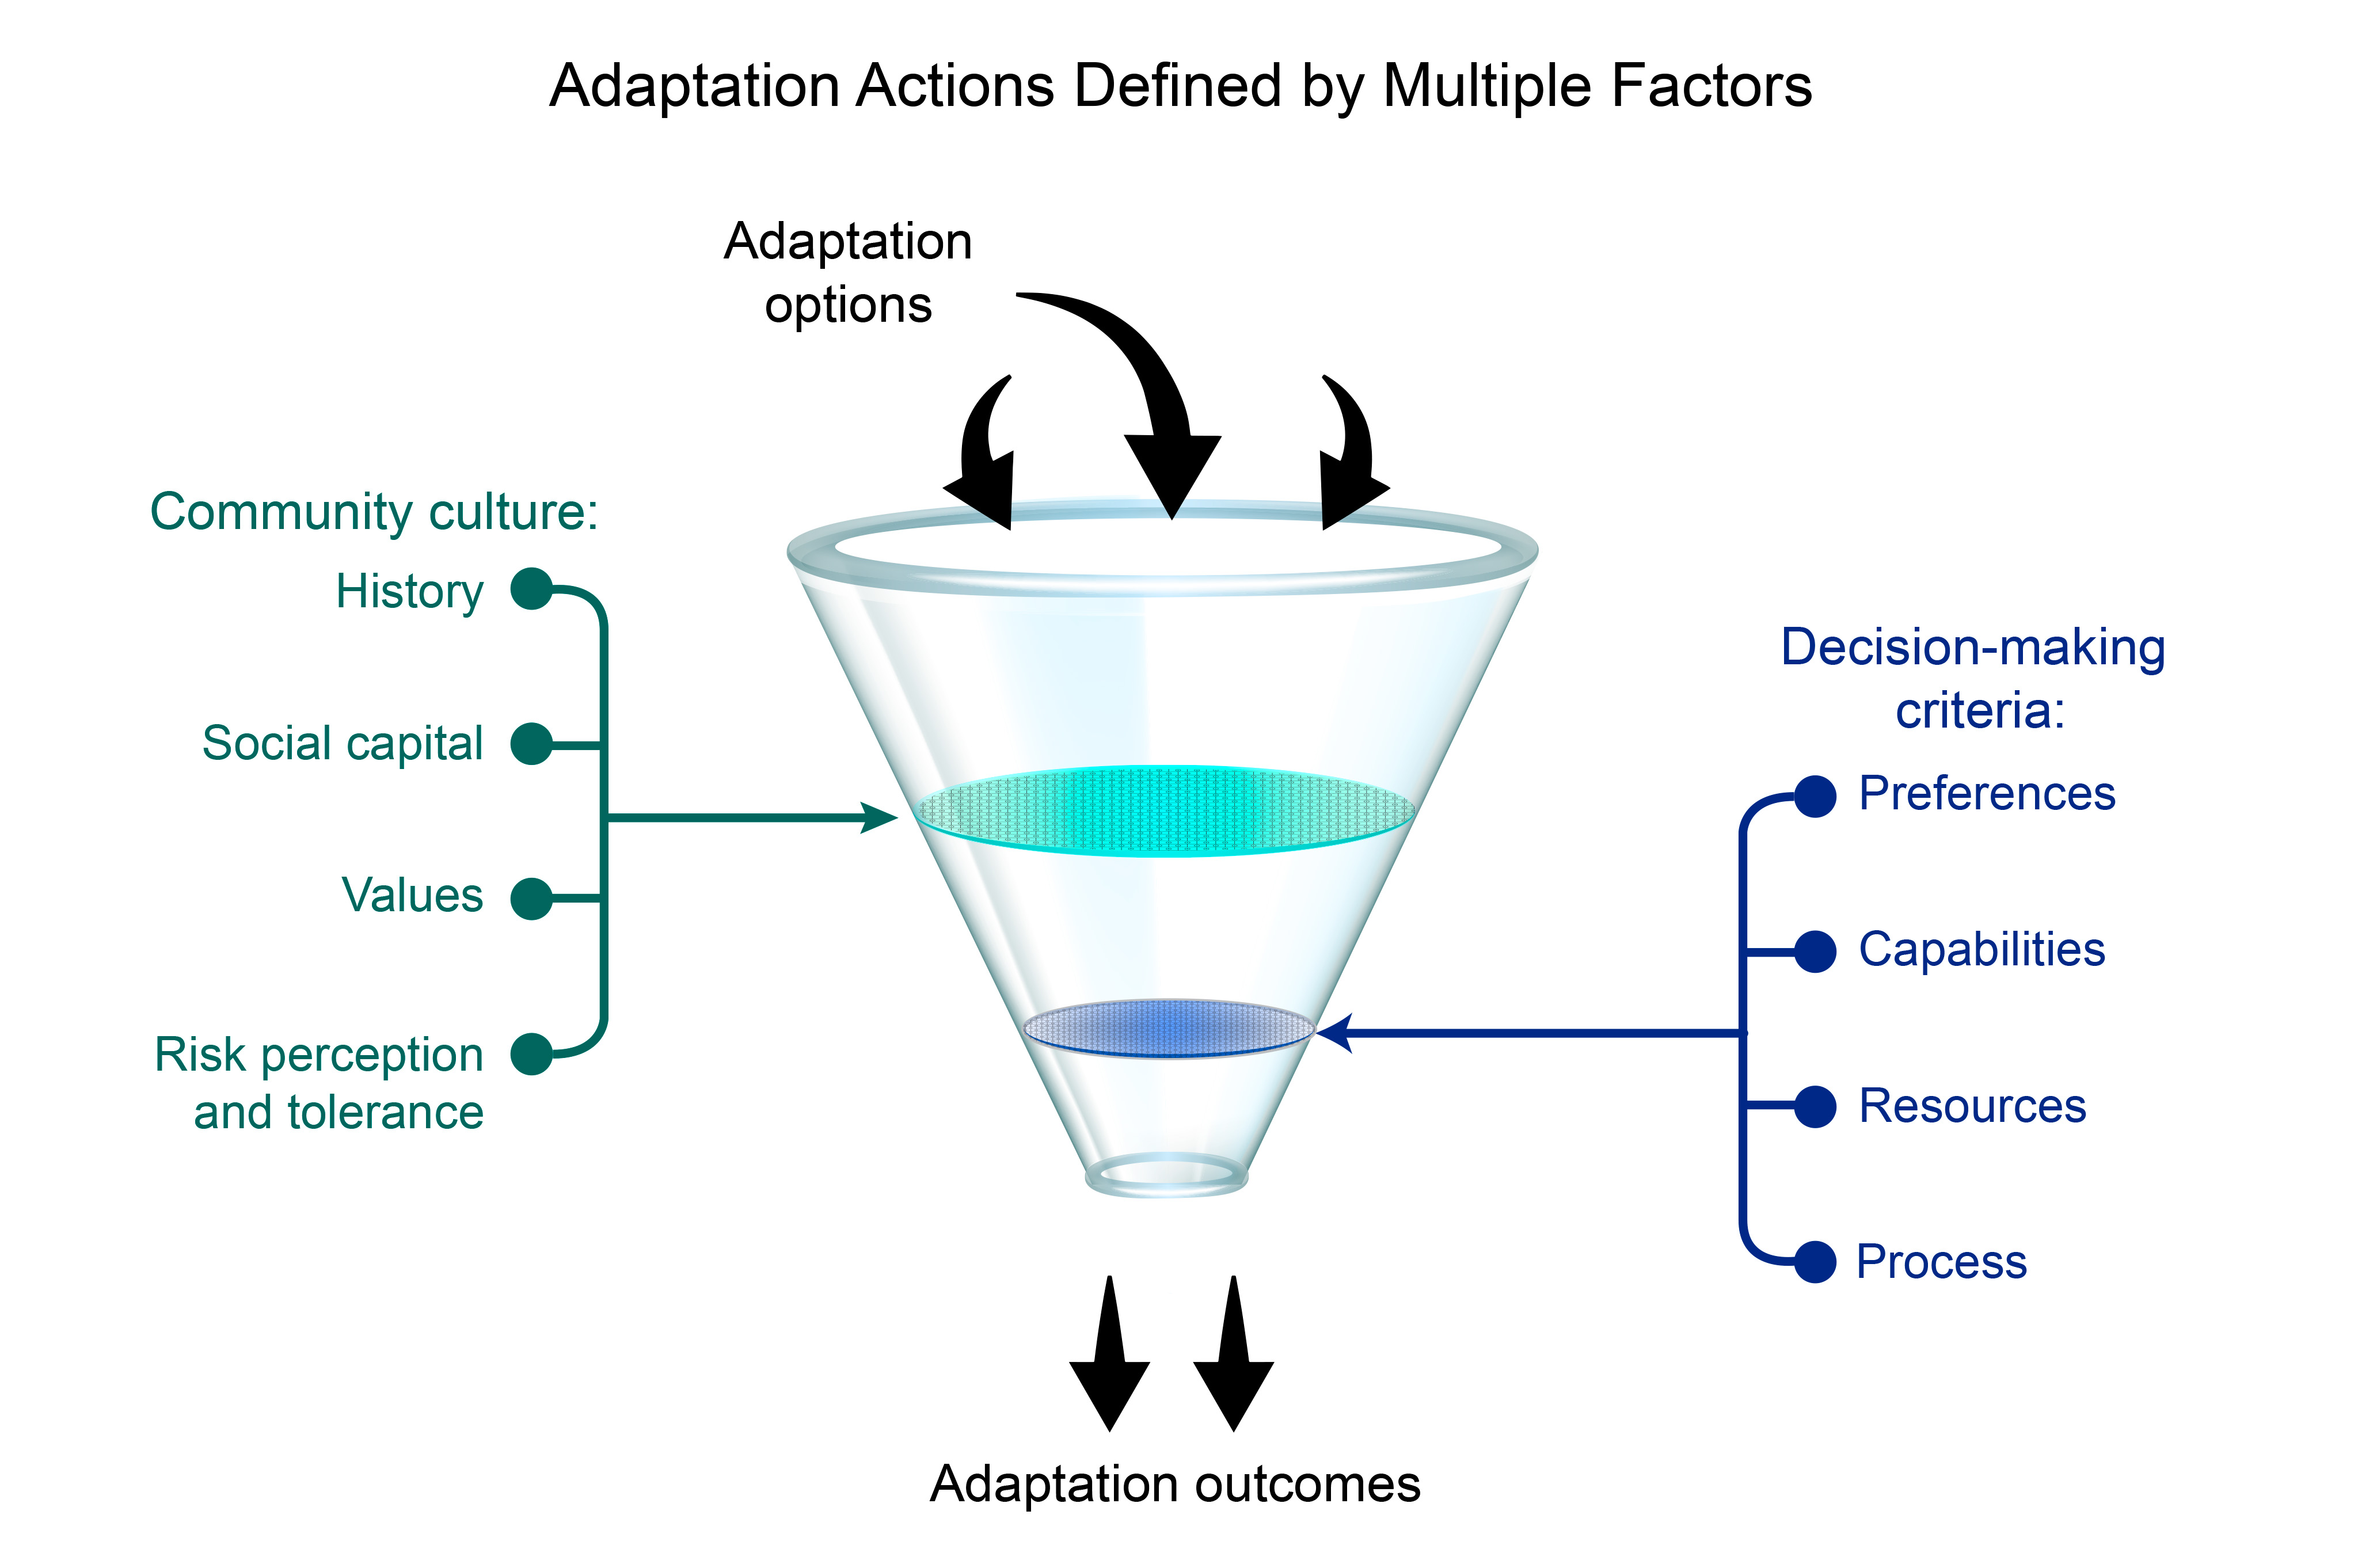 Adaptation Actions Defined by Multiple Factors